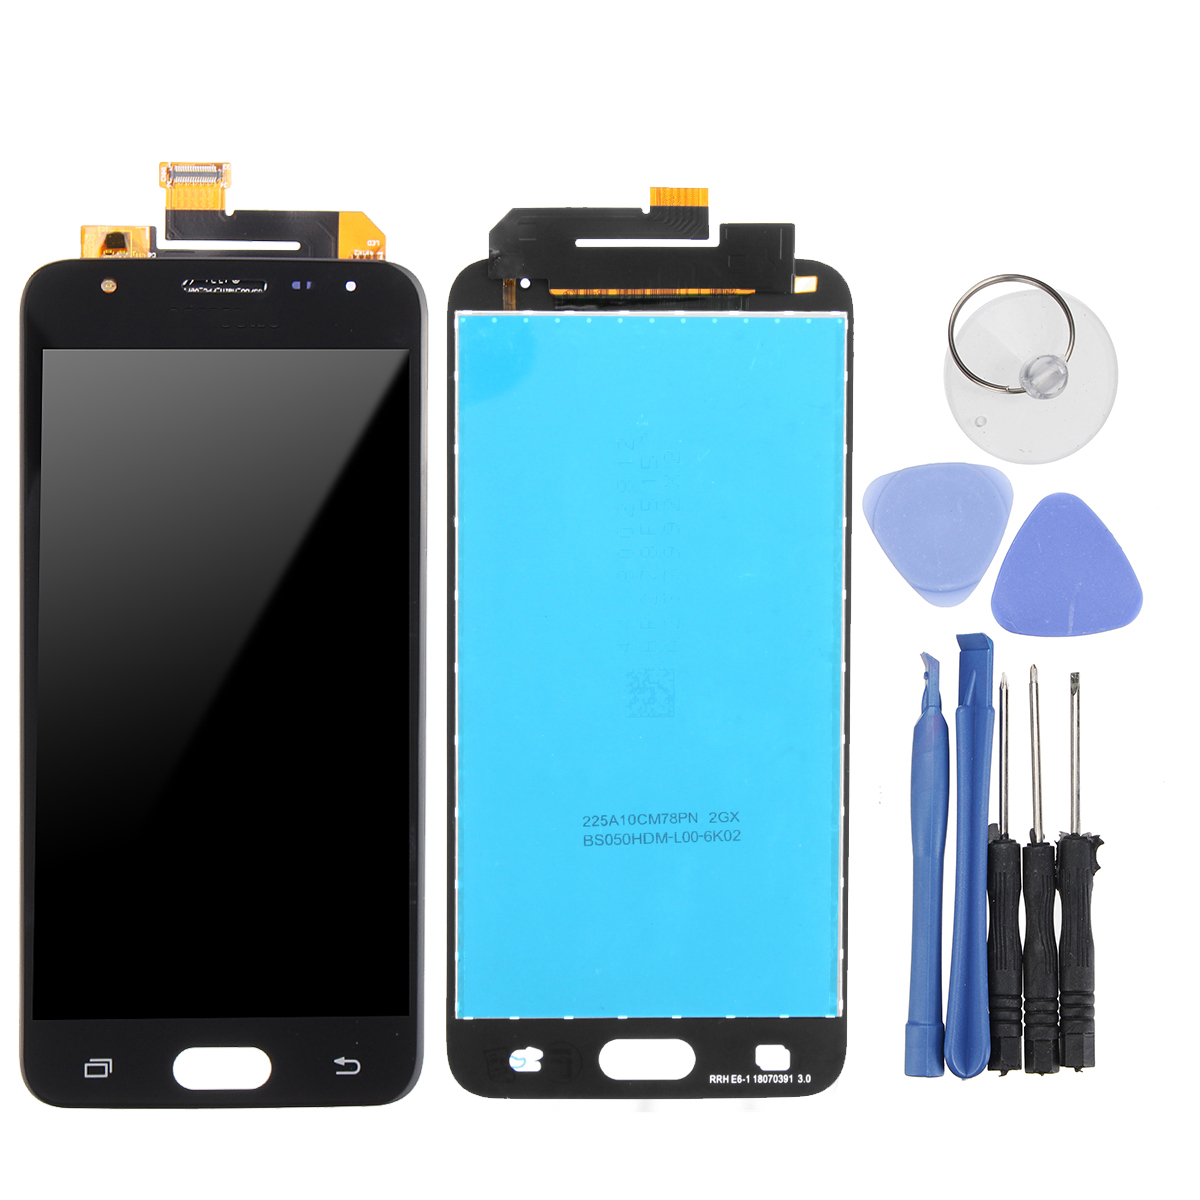 

LCD Display+Touch Screen Digitizer Replacement With Repair Tools For Samsung Galaxy j5 Prime G570